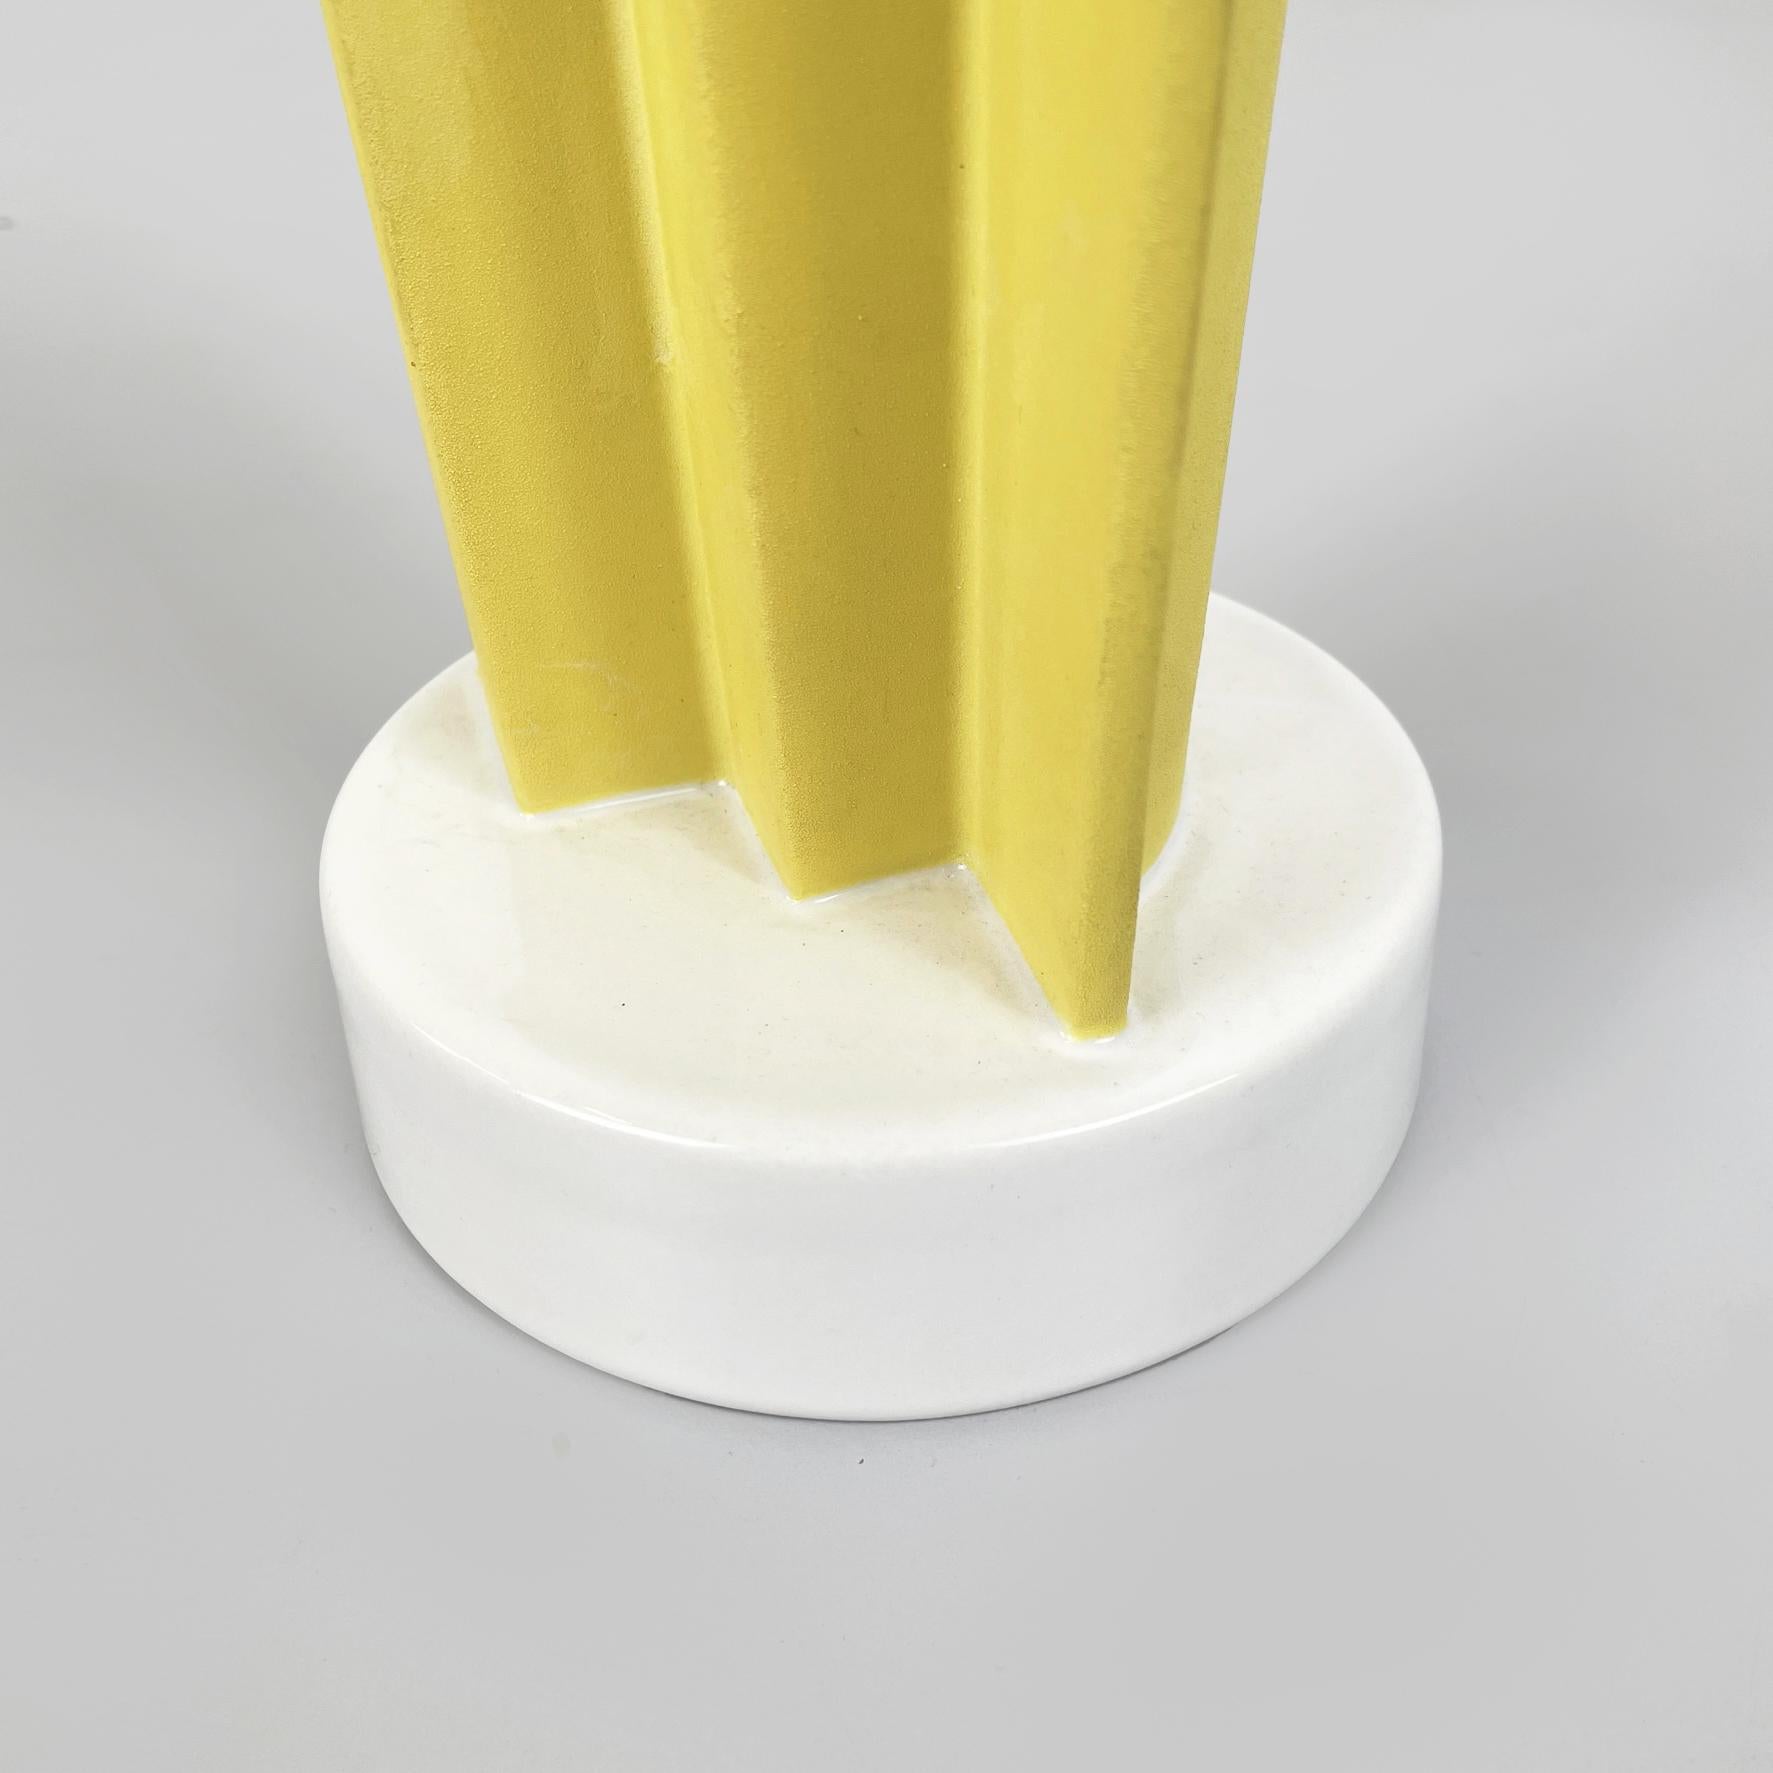 Italian Modern Yellow Ceramic Vase ET1 by Ettore Sottsass for A. Sarri, 1990s For Sale 6